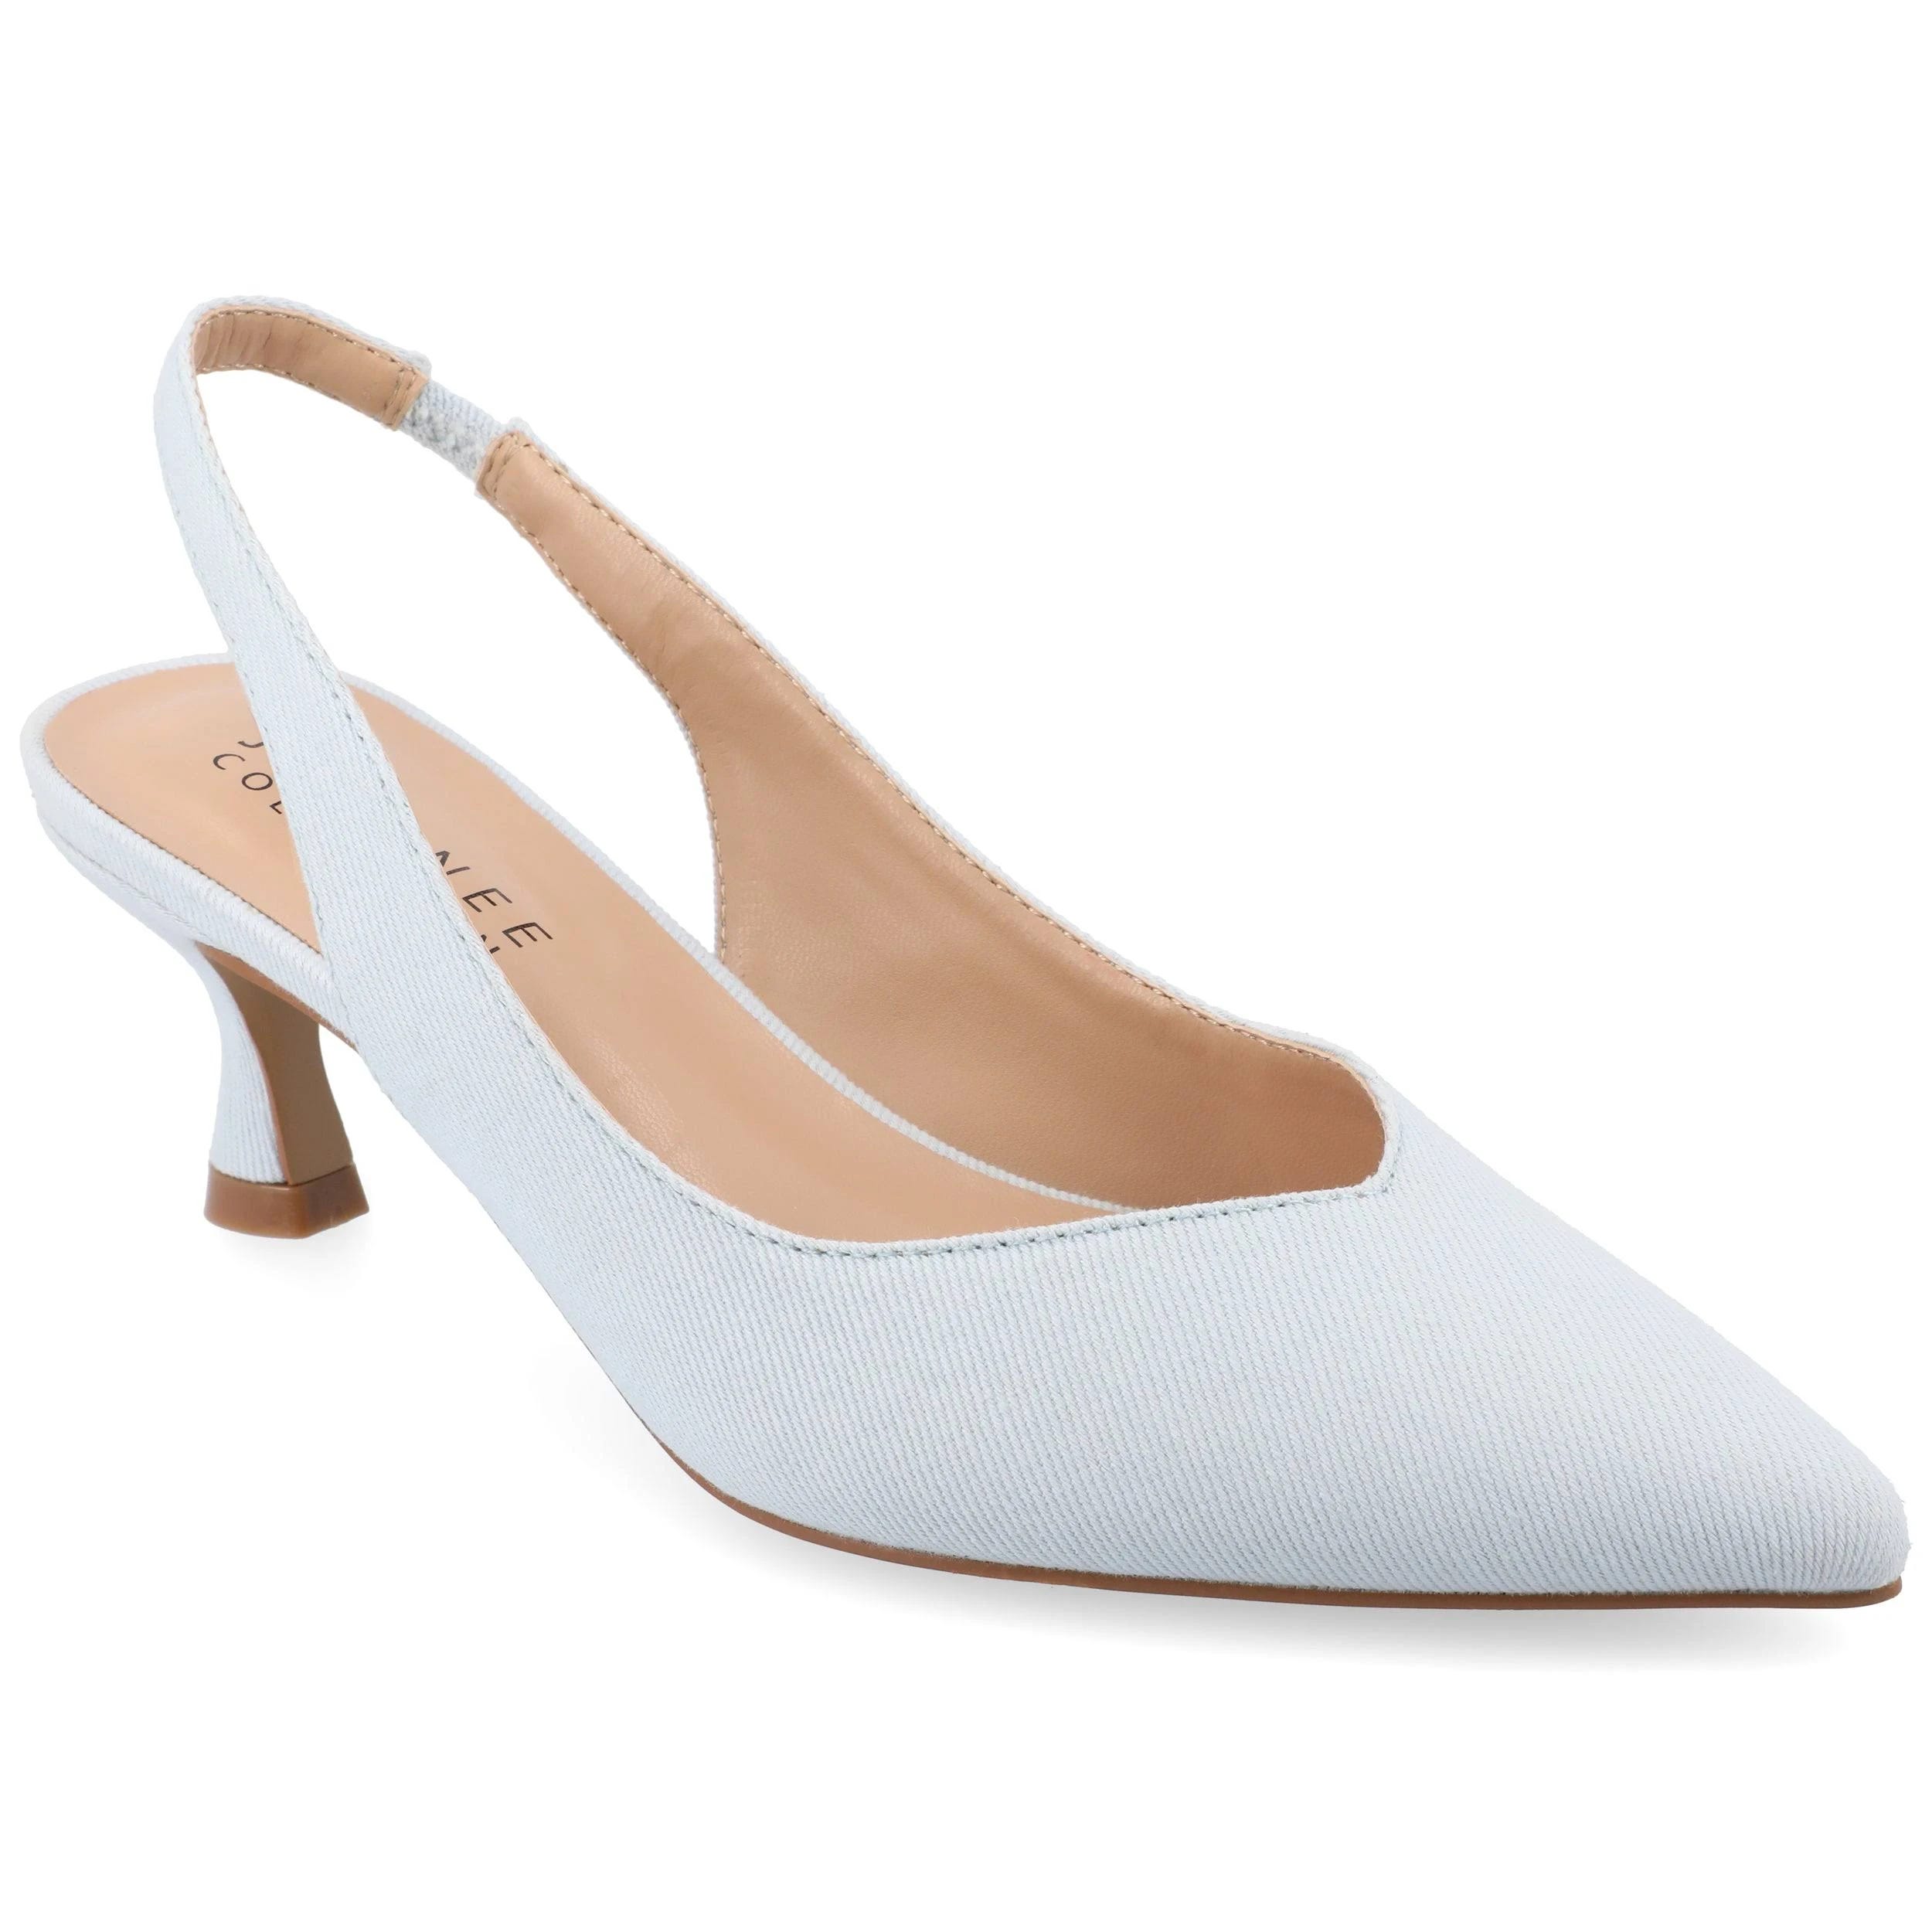 Women's Mikoa Slingback Pumps: Chic, Wide-Width Low Heels for Comfortable Style | Image